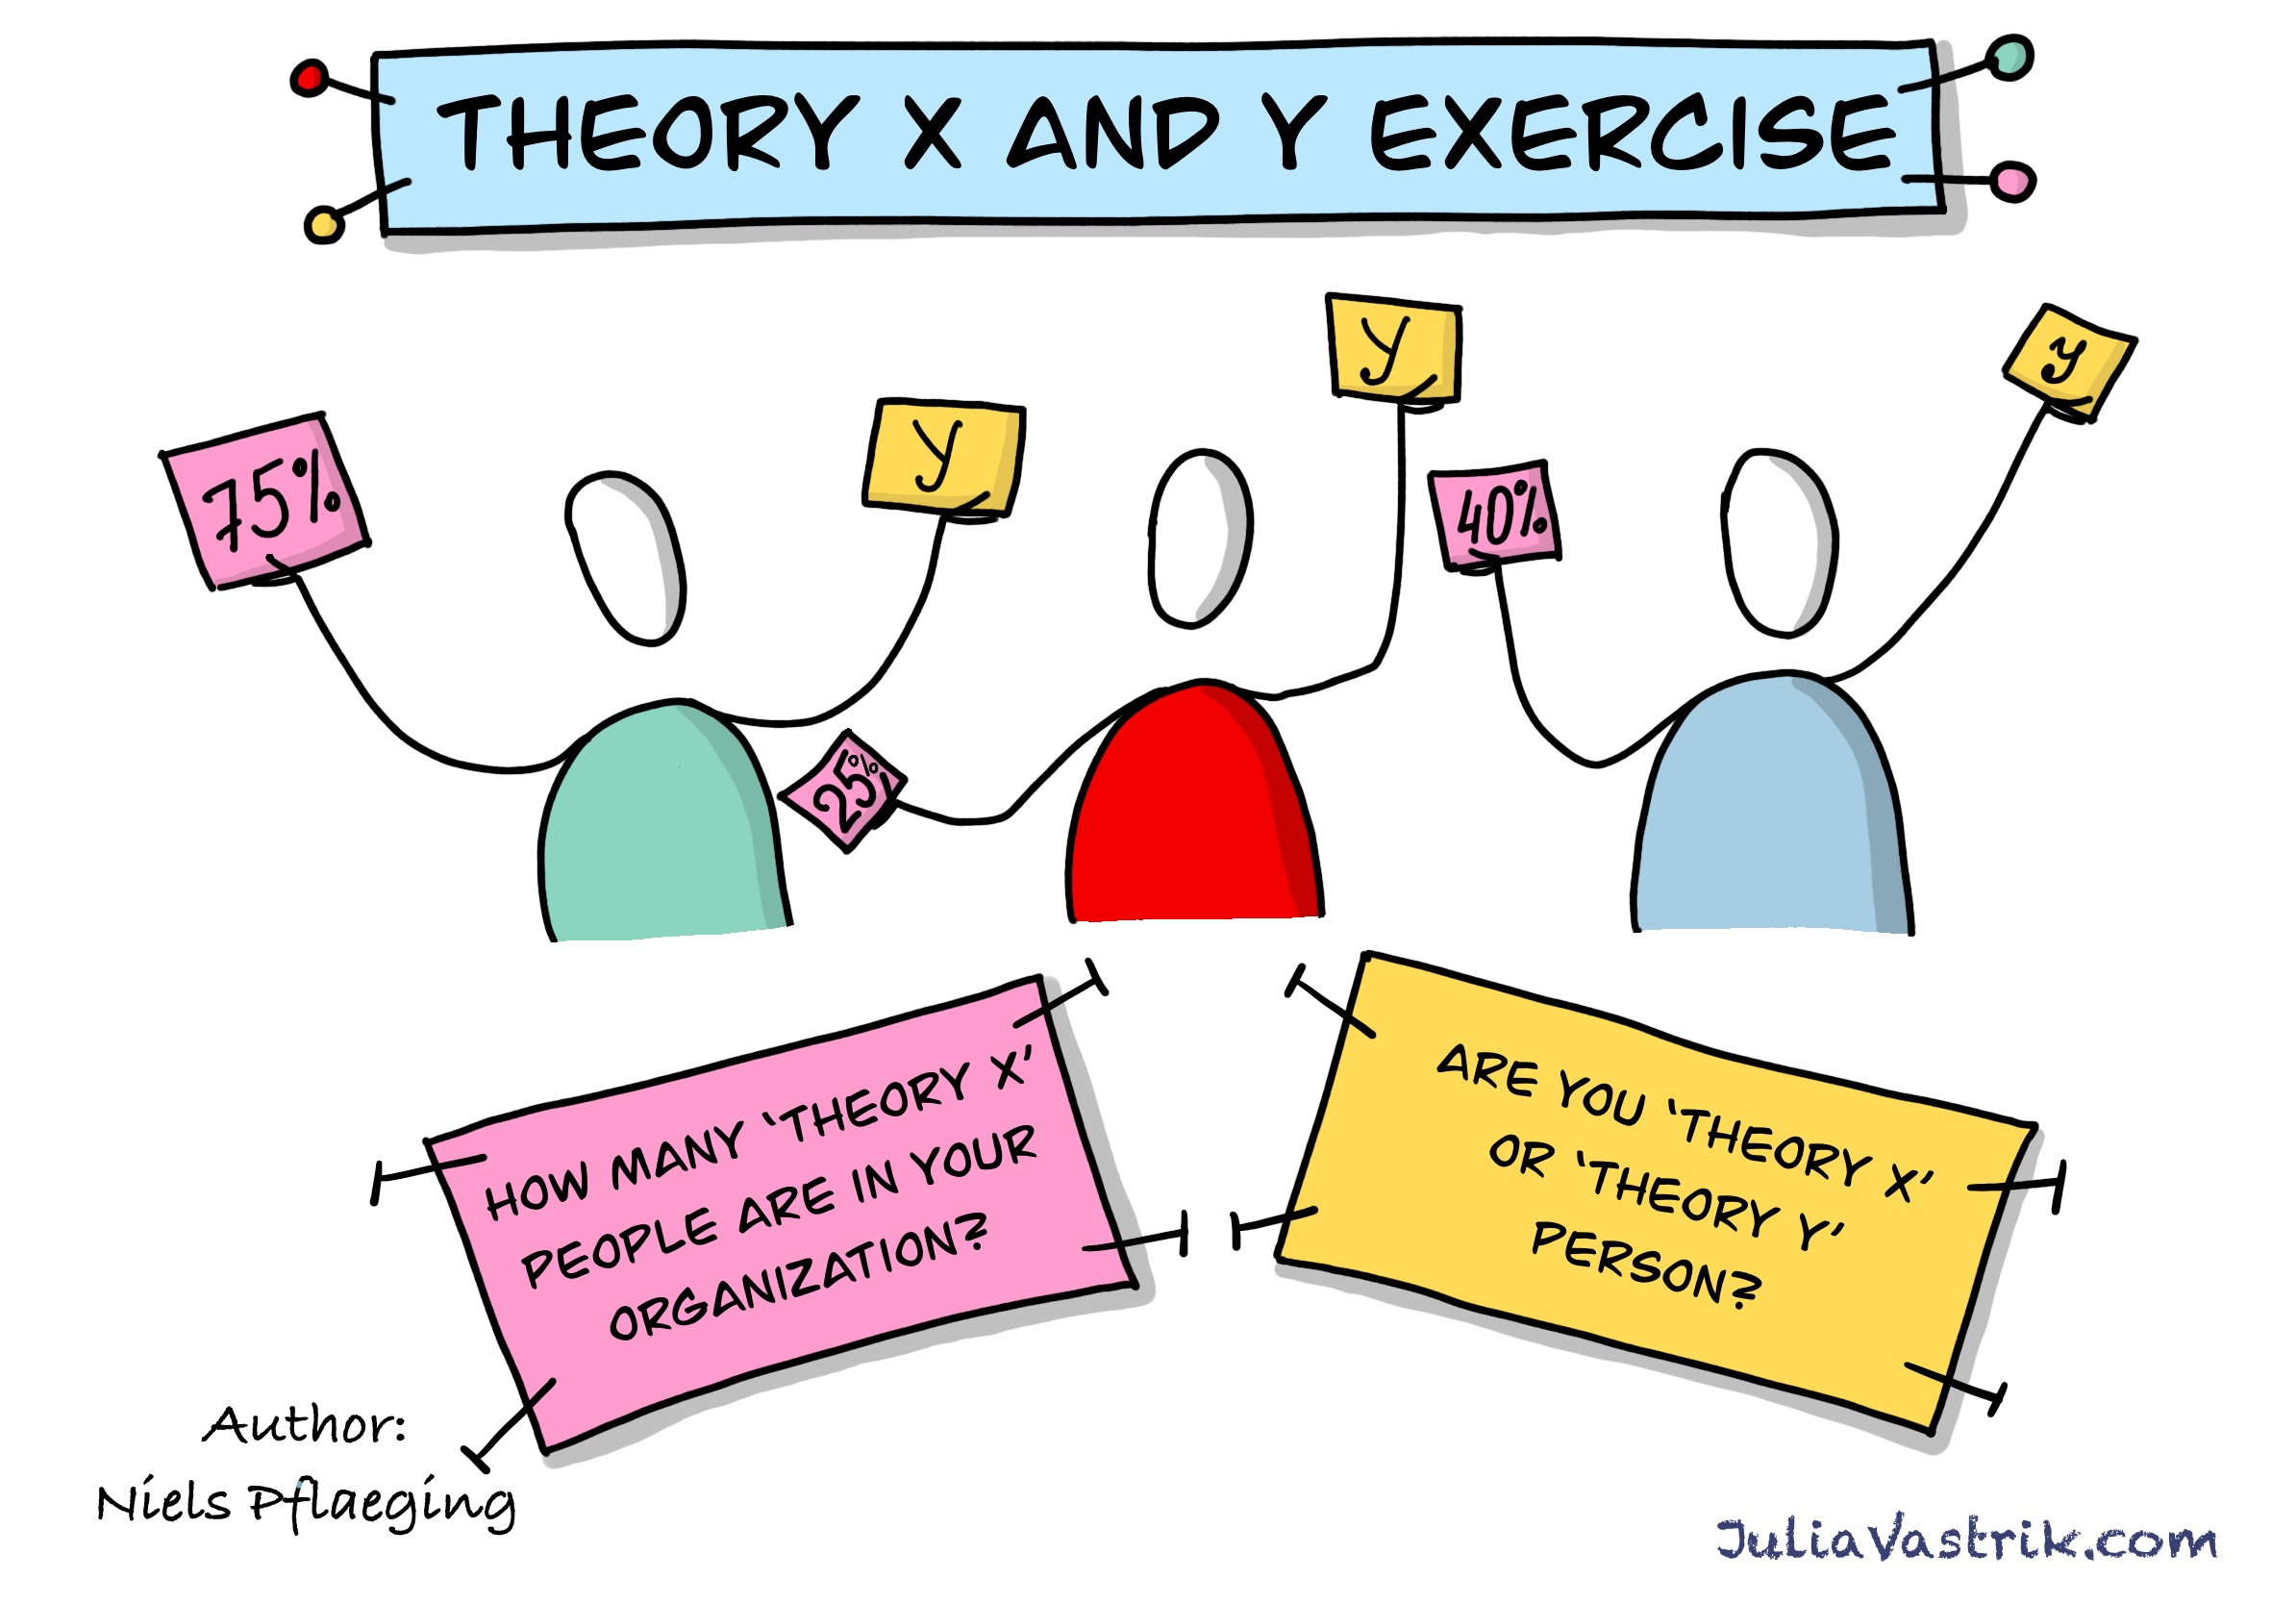 How I run the “Theory X and Y” exercise